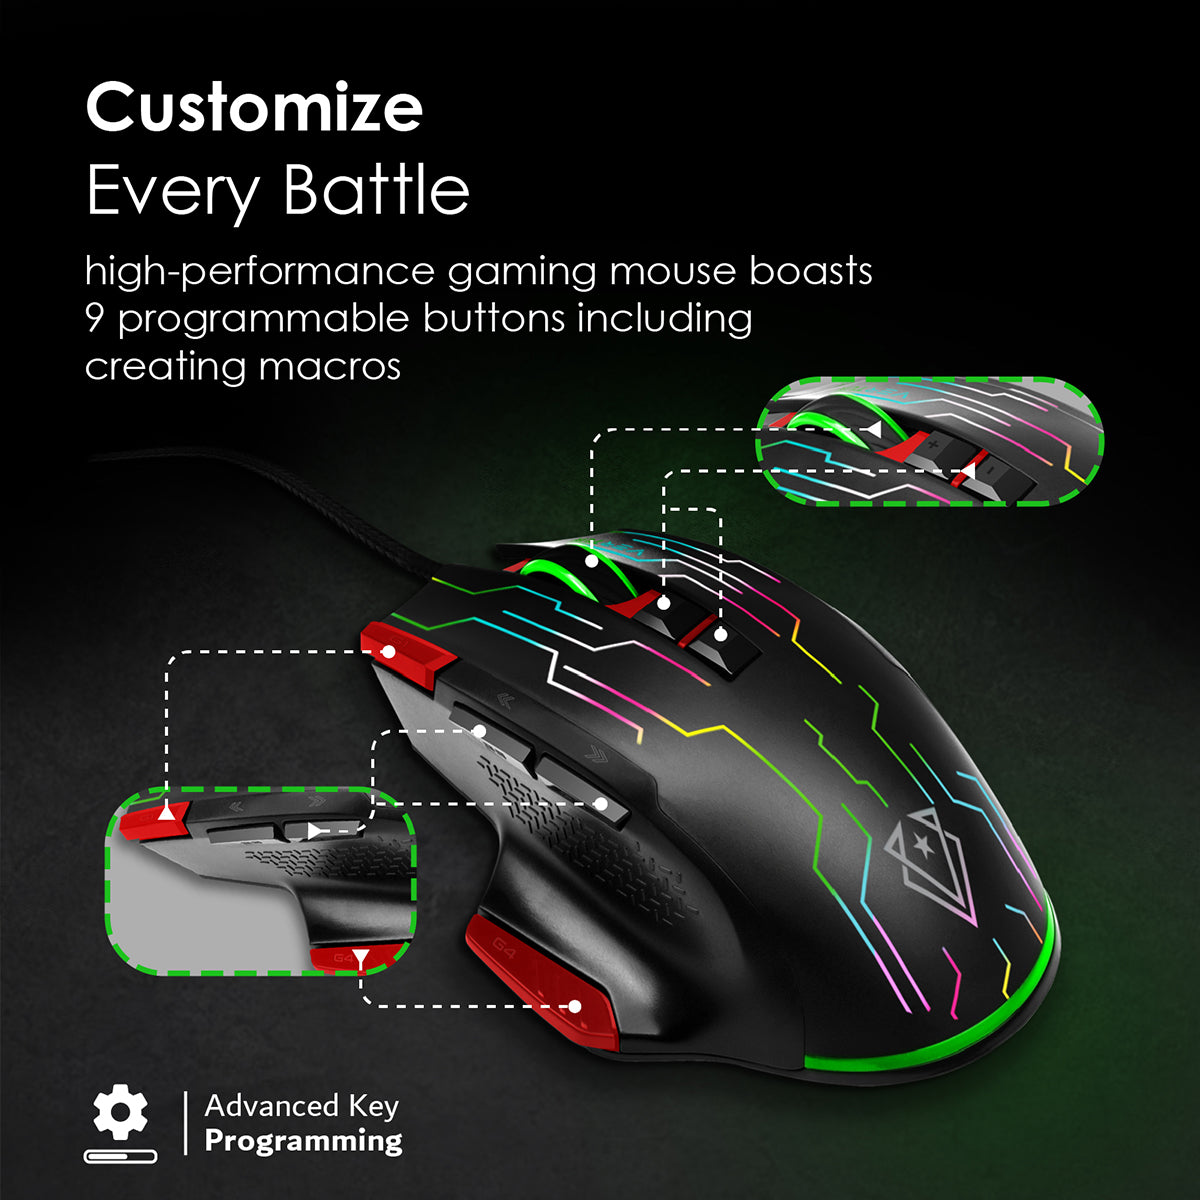 Superior Quick Performance Wired Gaming Mouse